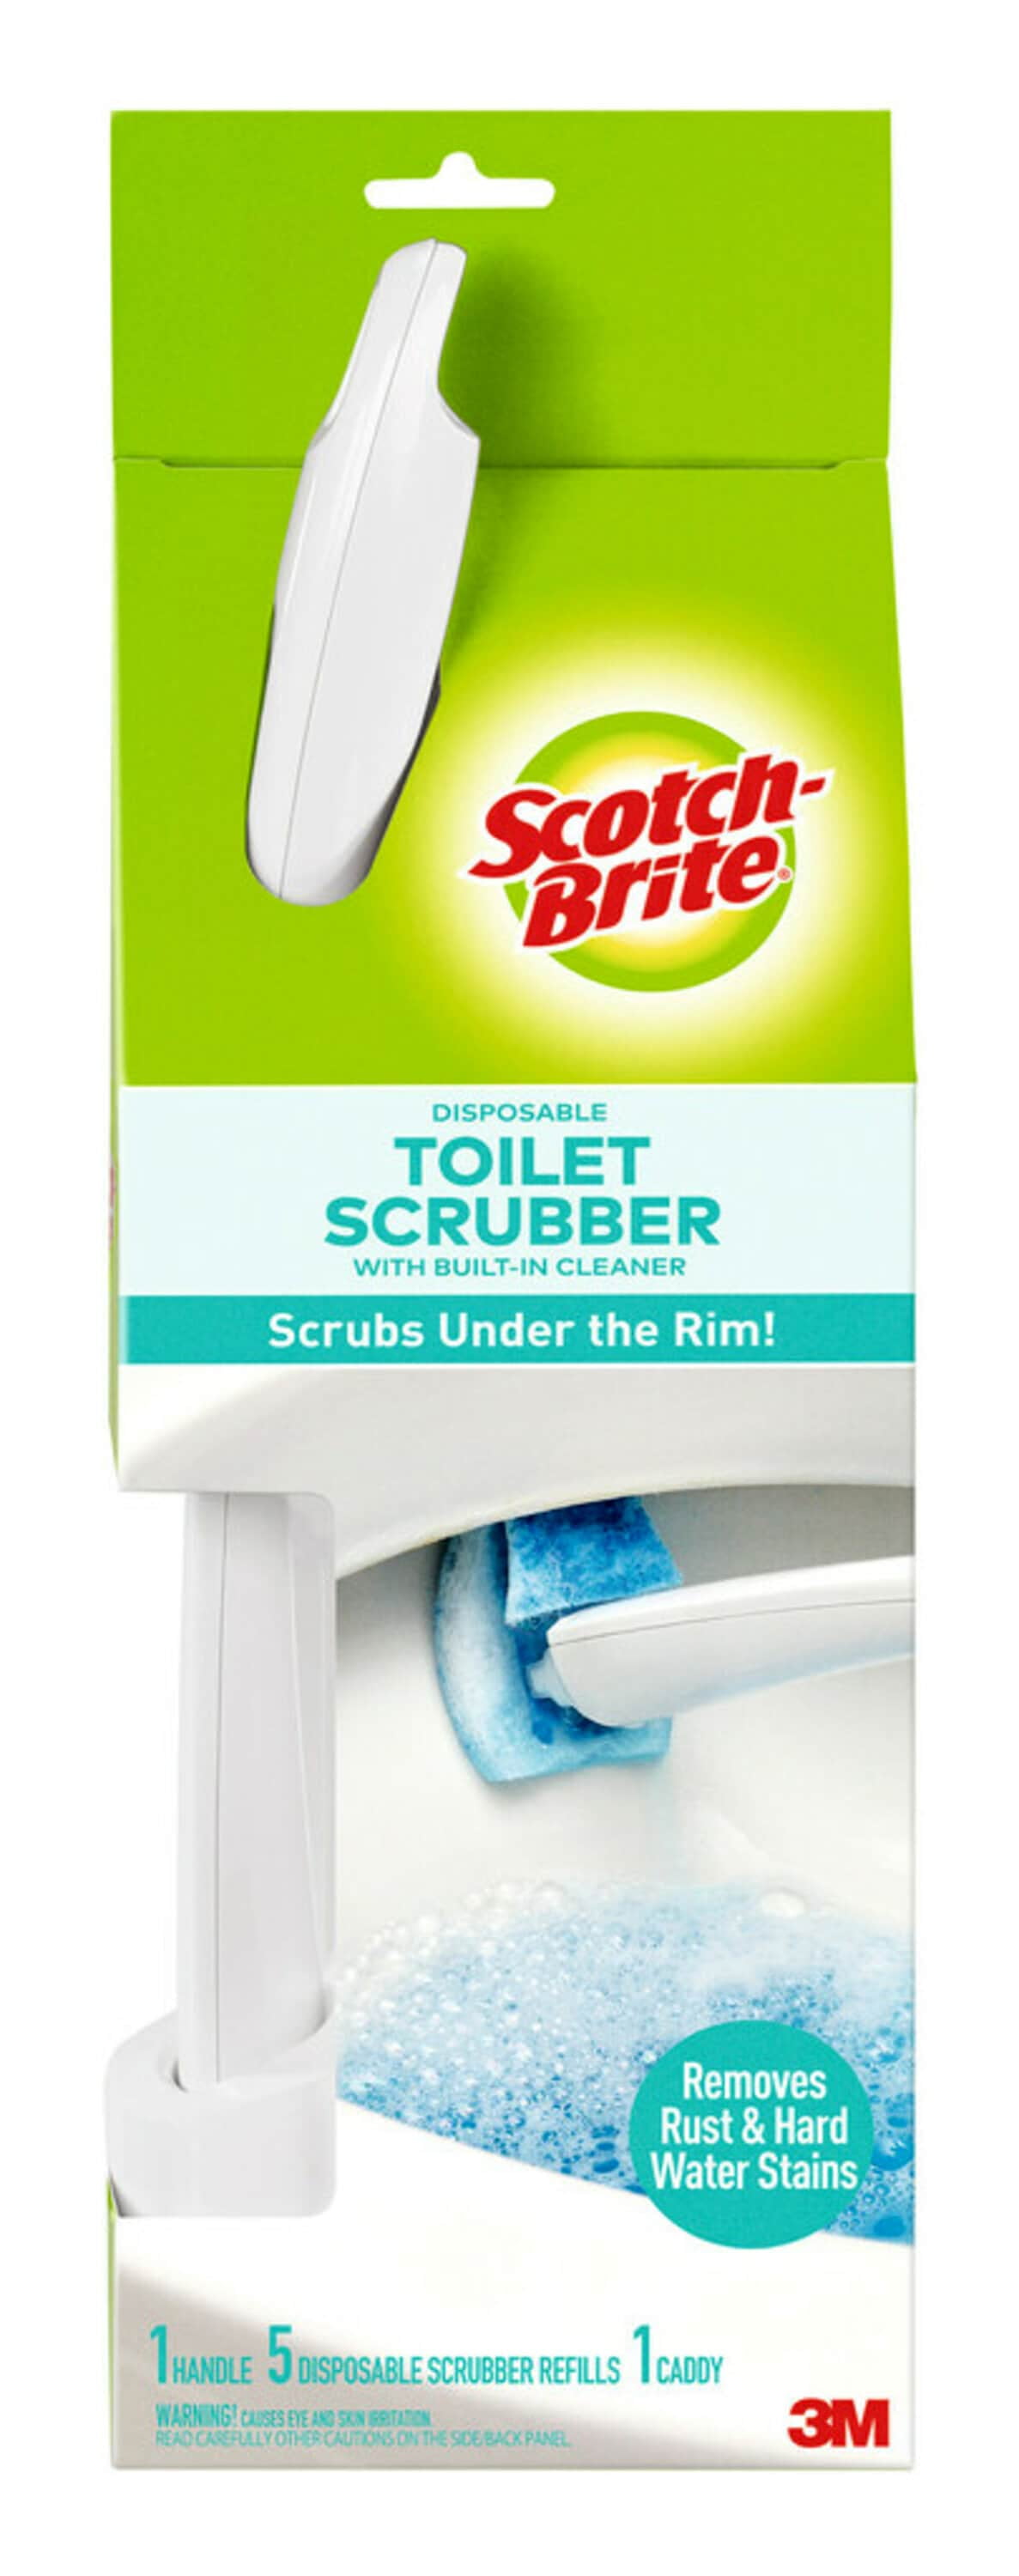 3M Scotch Brite Toilet Bowl Disposable Cleaner Scrubber Brushes 12 Refill 557 